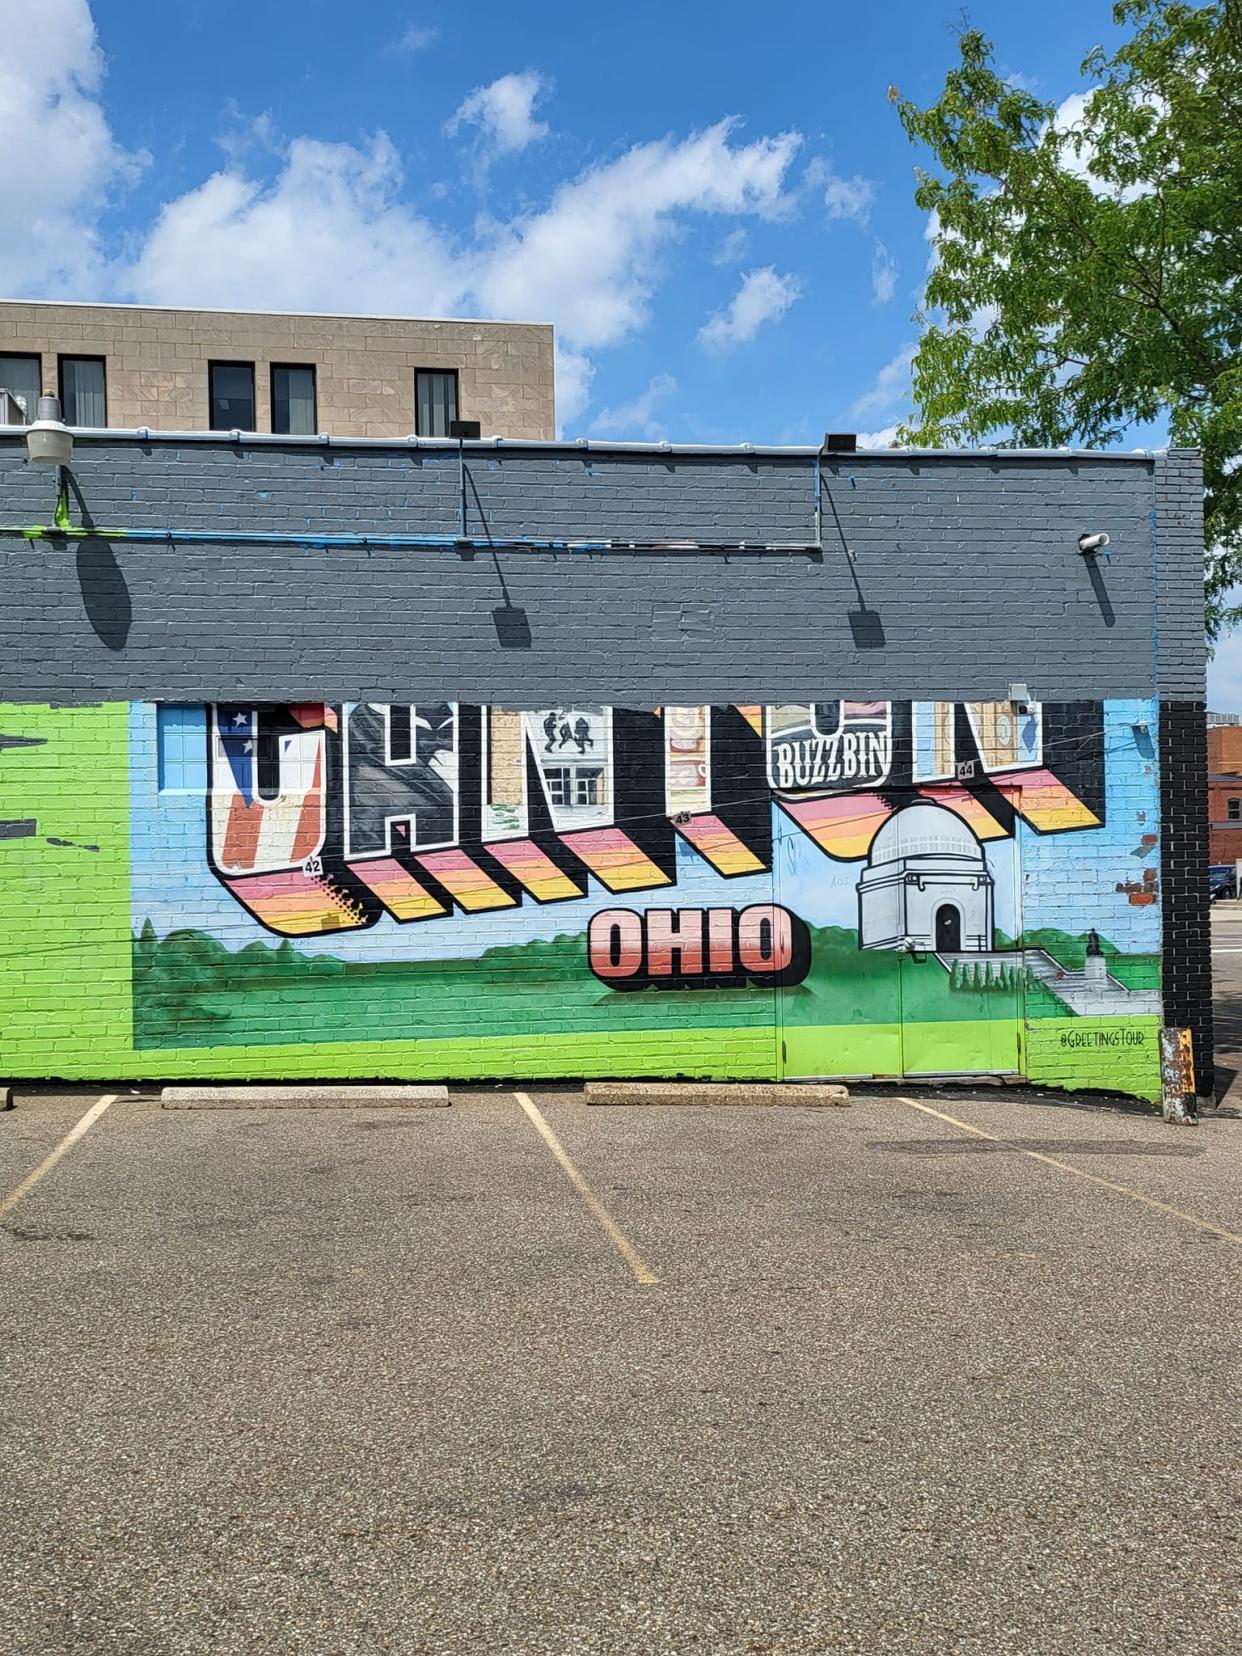 A postcard-style mural that said "Greetings from Canton, Ohio," was recently covered with gray and black paint. The mural had been located on the side of the former Buzzbin building at 331 Cleveland Avenue NW.